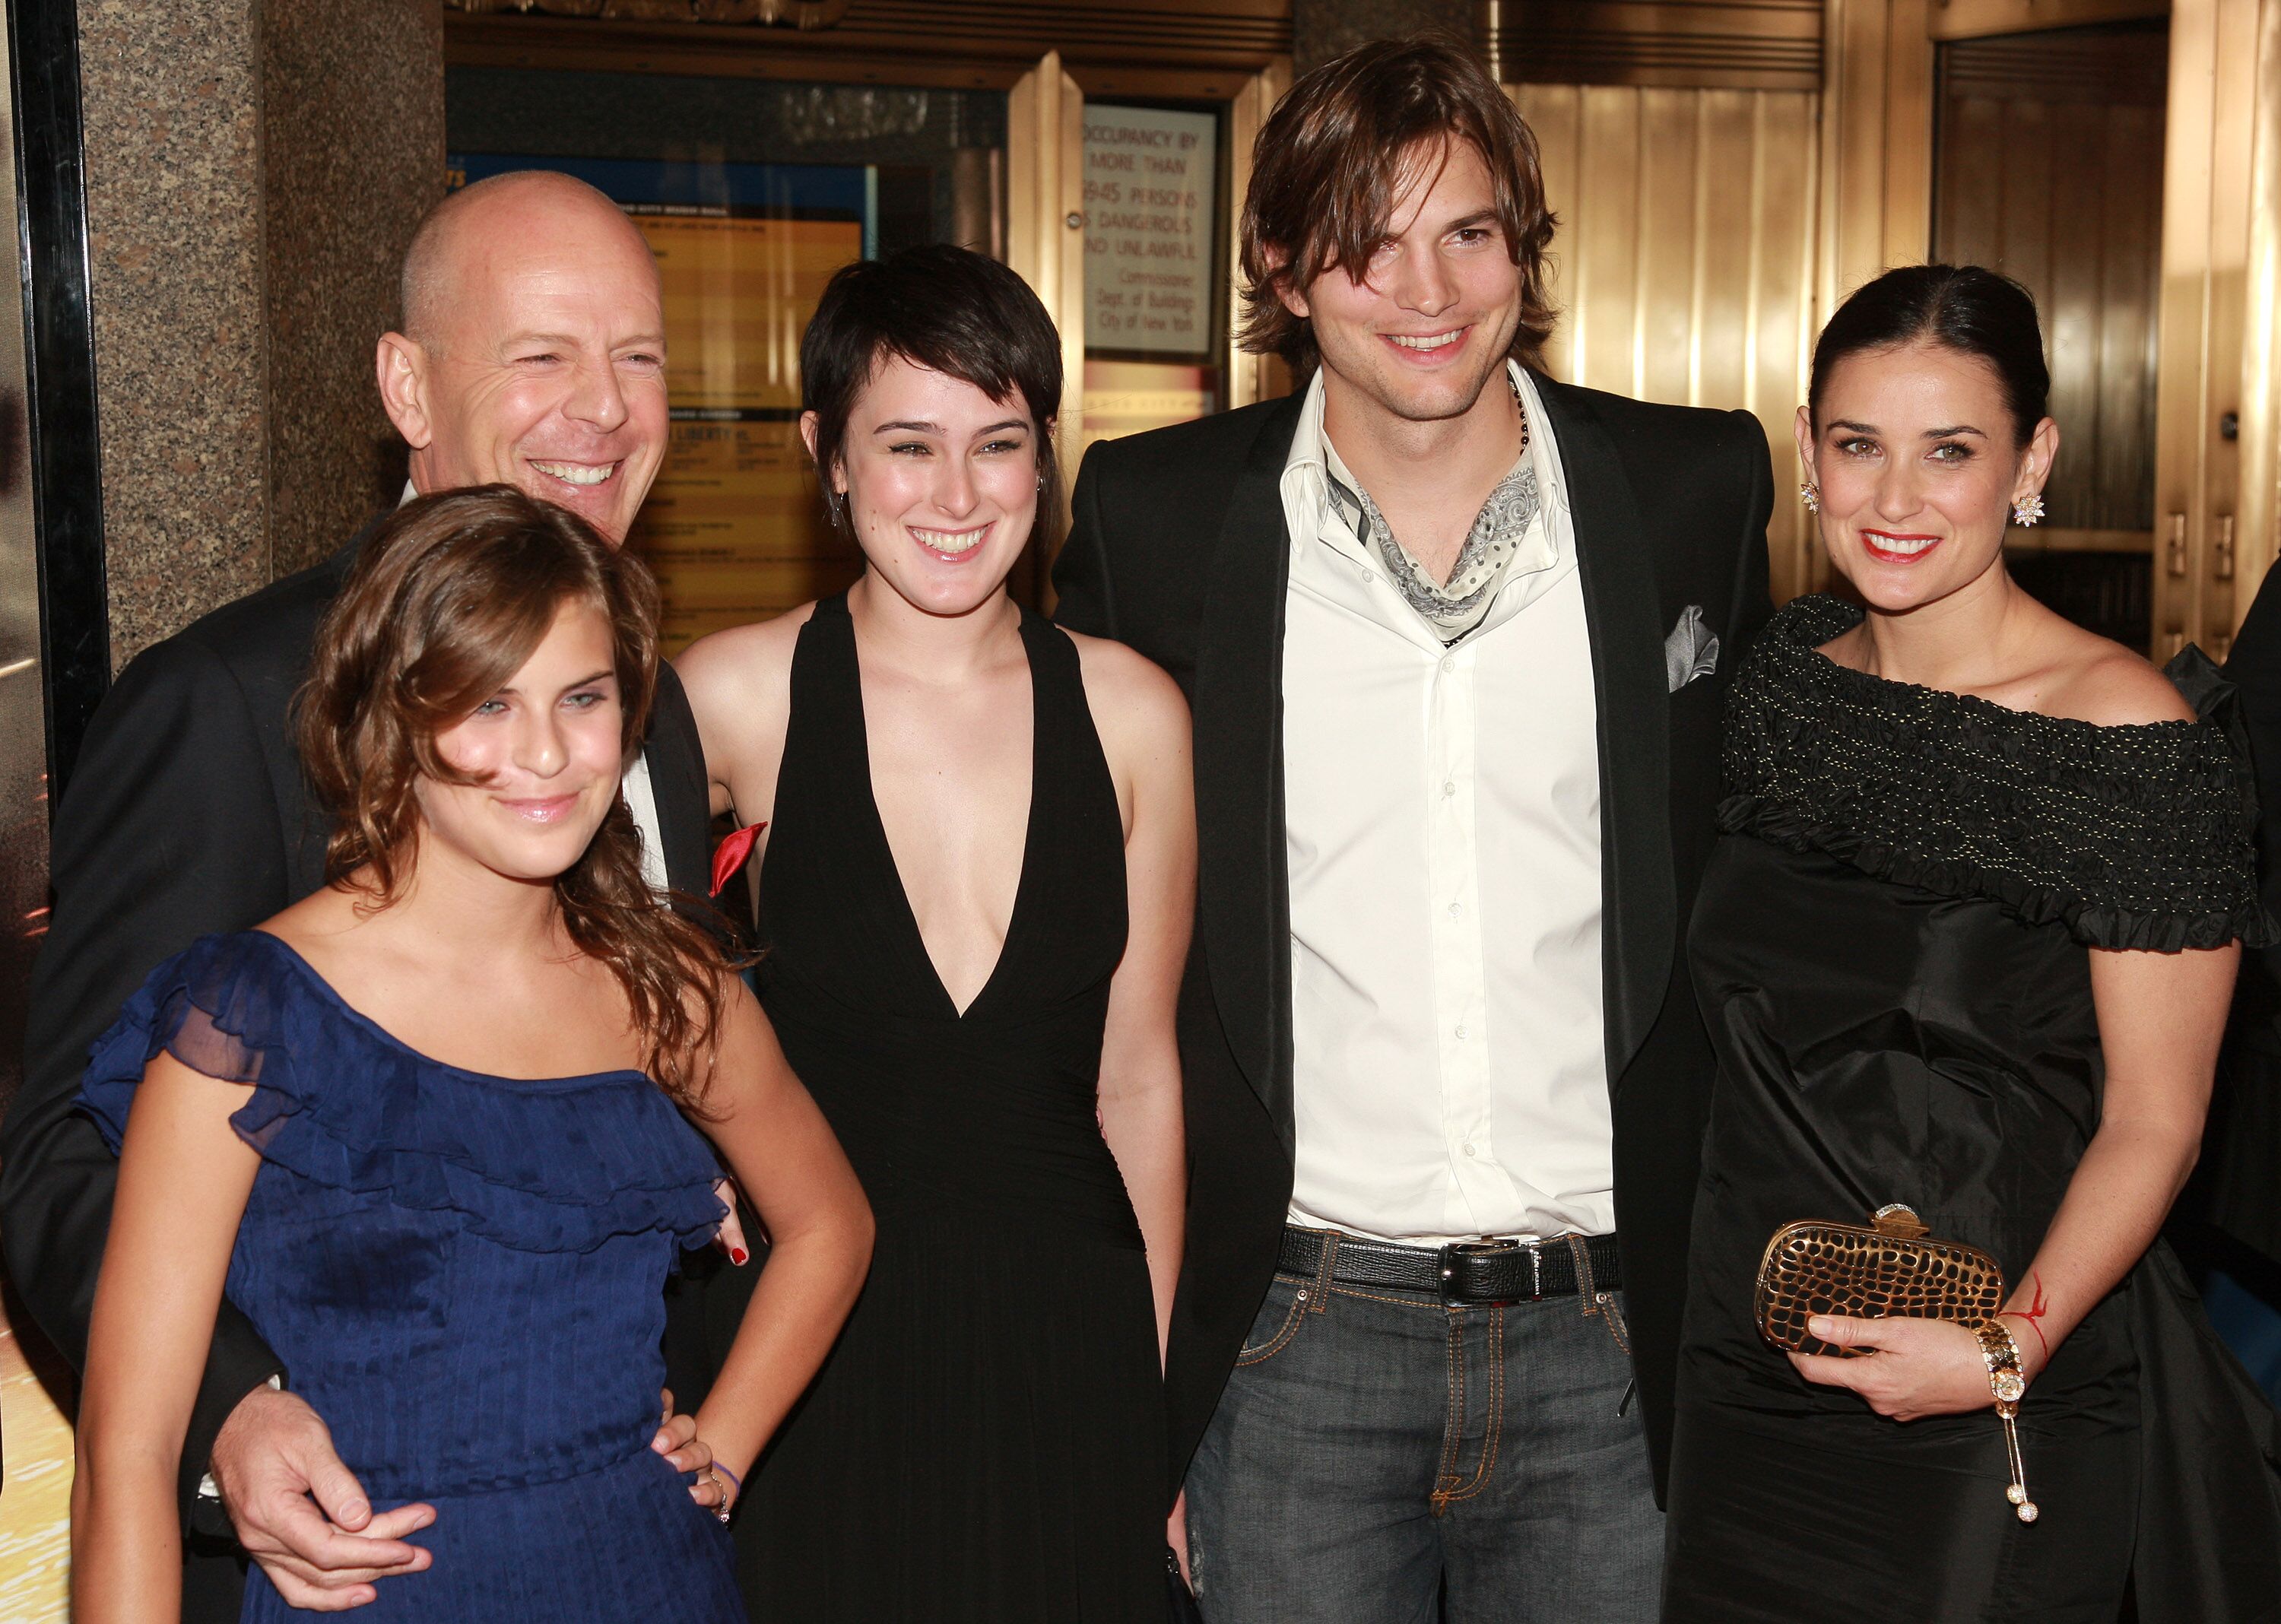 Ashton Kutcher, Demi Moore, and Bruce Willis pose with Rumer and Tallulah Willis at the premiere of Live Free Or Die Hard on June 22, 2007, in New York City | Photo: Evan Agostini/Getty Images